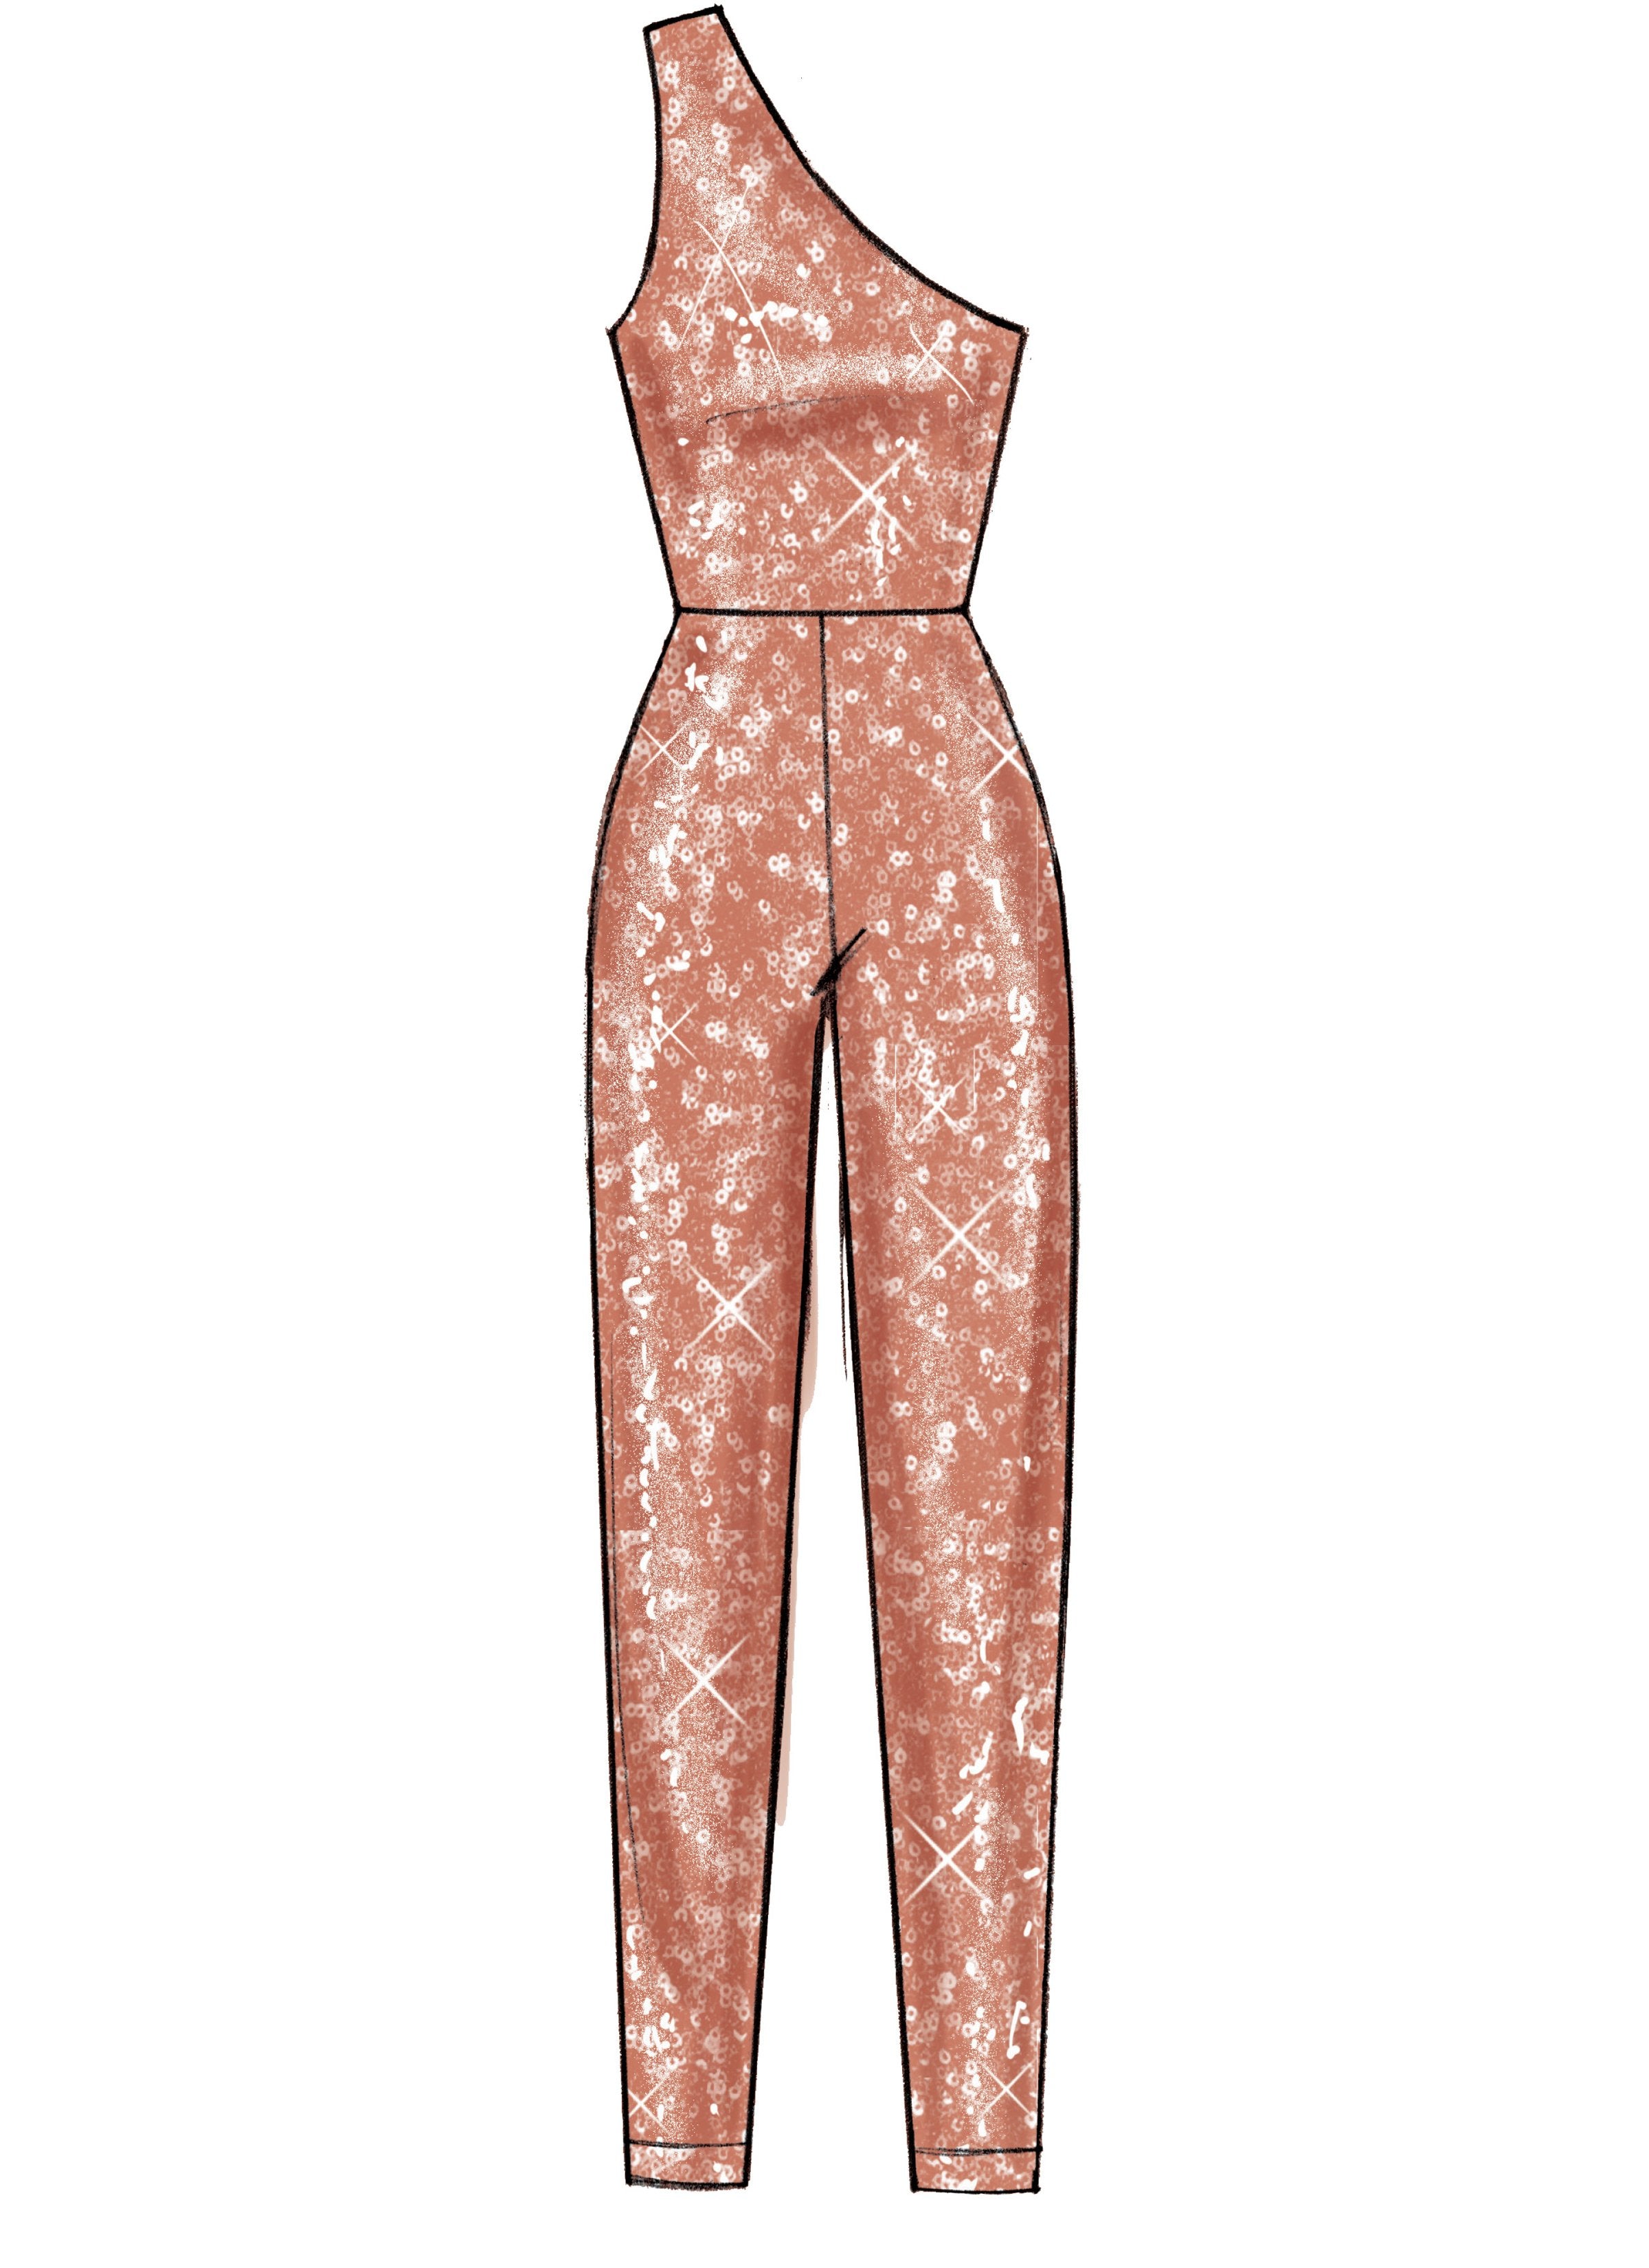 M7910 Misses' Jumpsuits | Create It! Pattern from Jaycotts Sewing Supplies